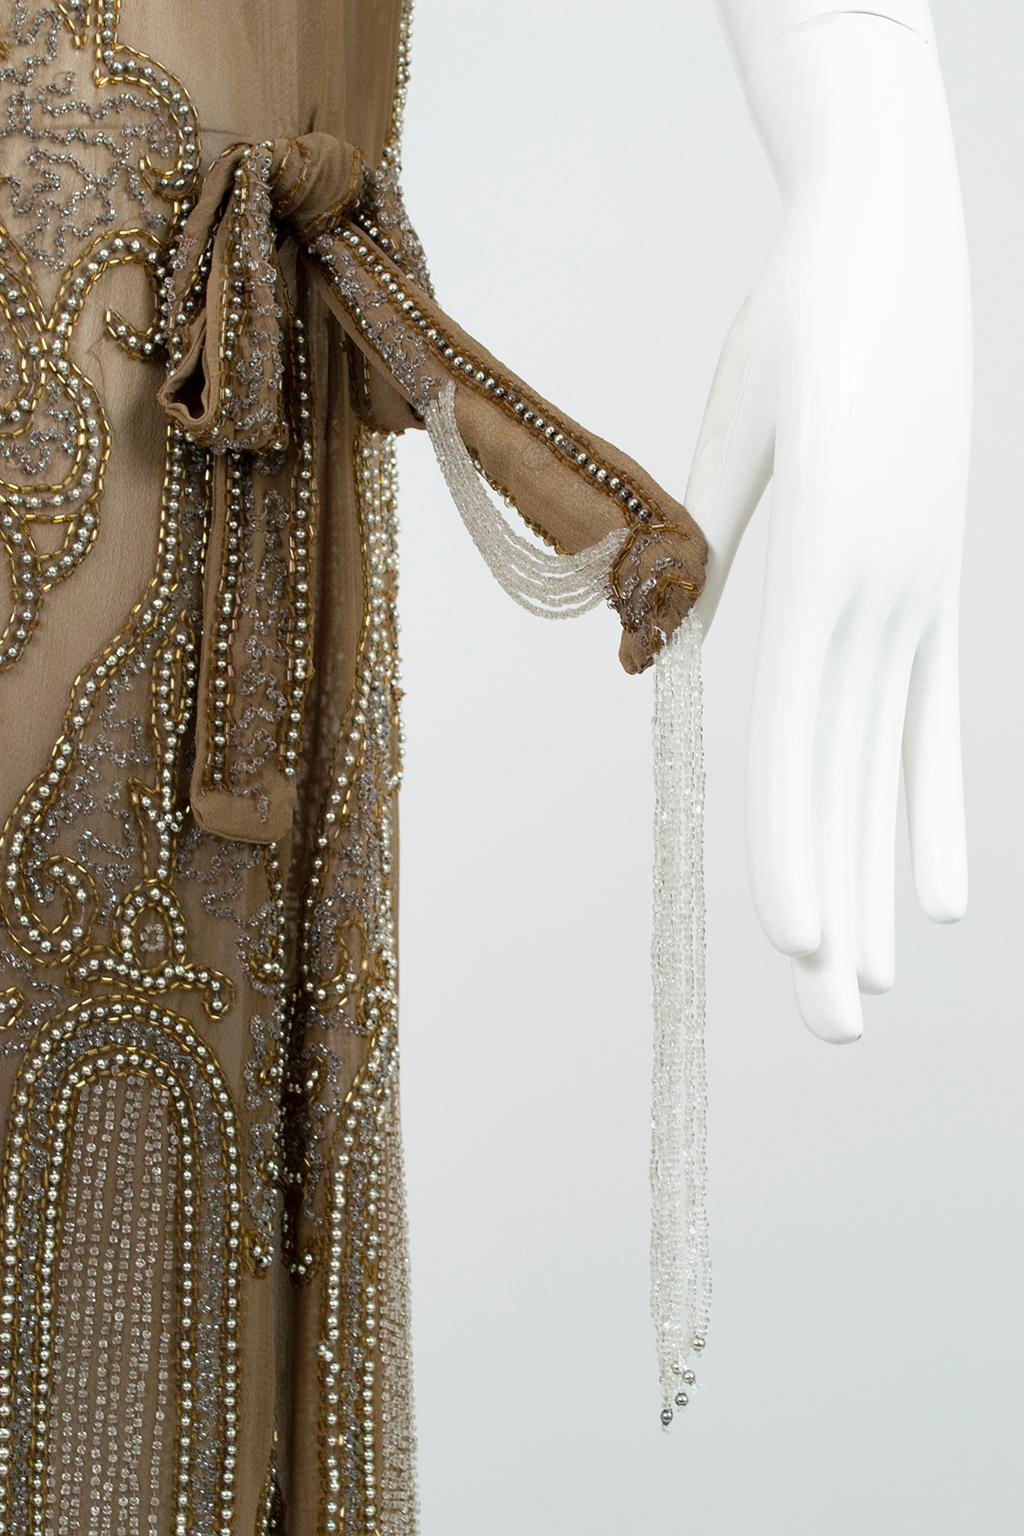 Taupe Crêpe Scallop Hem Flapper Dress with Silver-Plate Glass Beads – M, 1920s For Sale 6